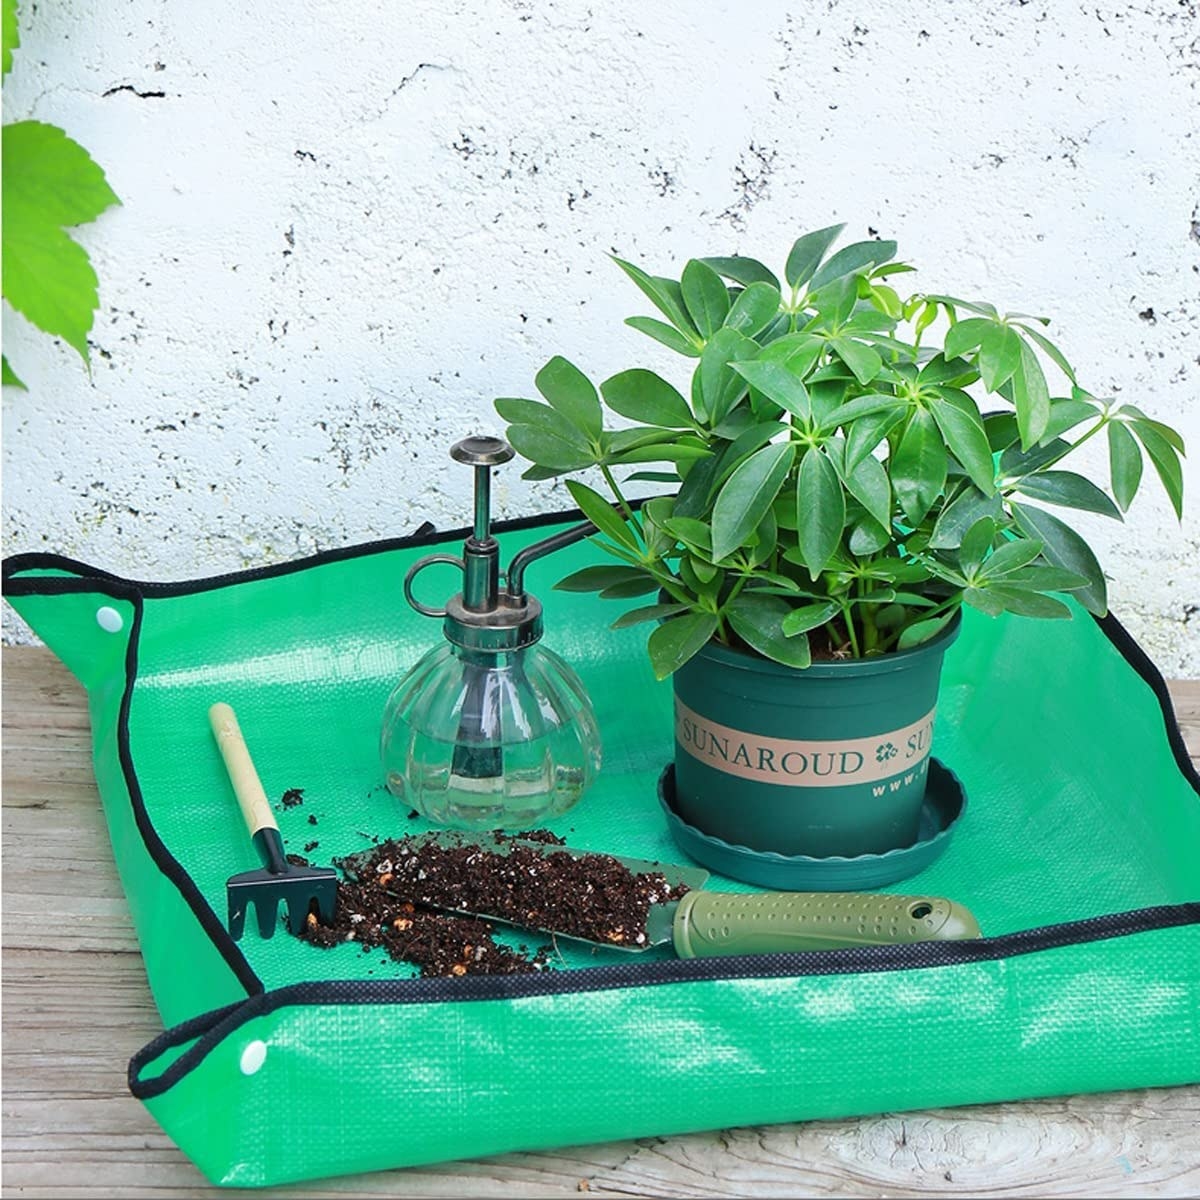 A square mat with a plant, small shovel and mister on it